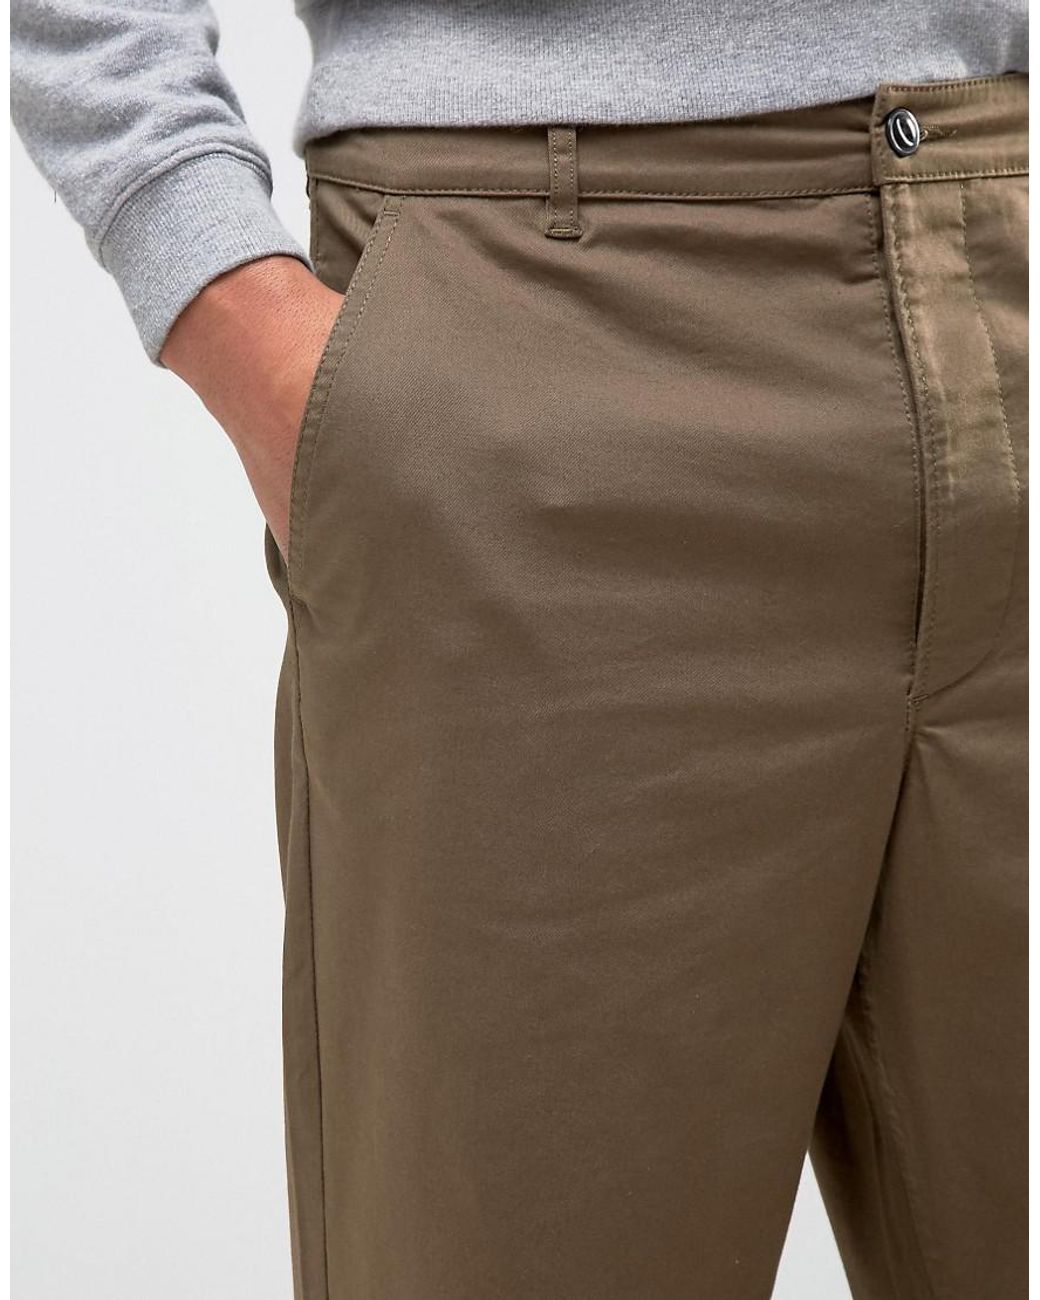 7 Best Chinos for Men in 2023 The Workhorse of Your Wardrobe